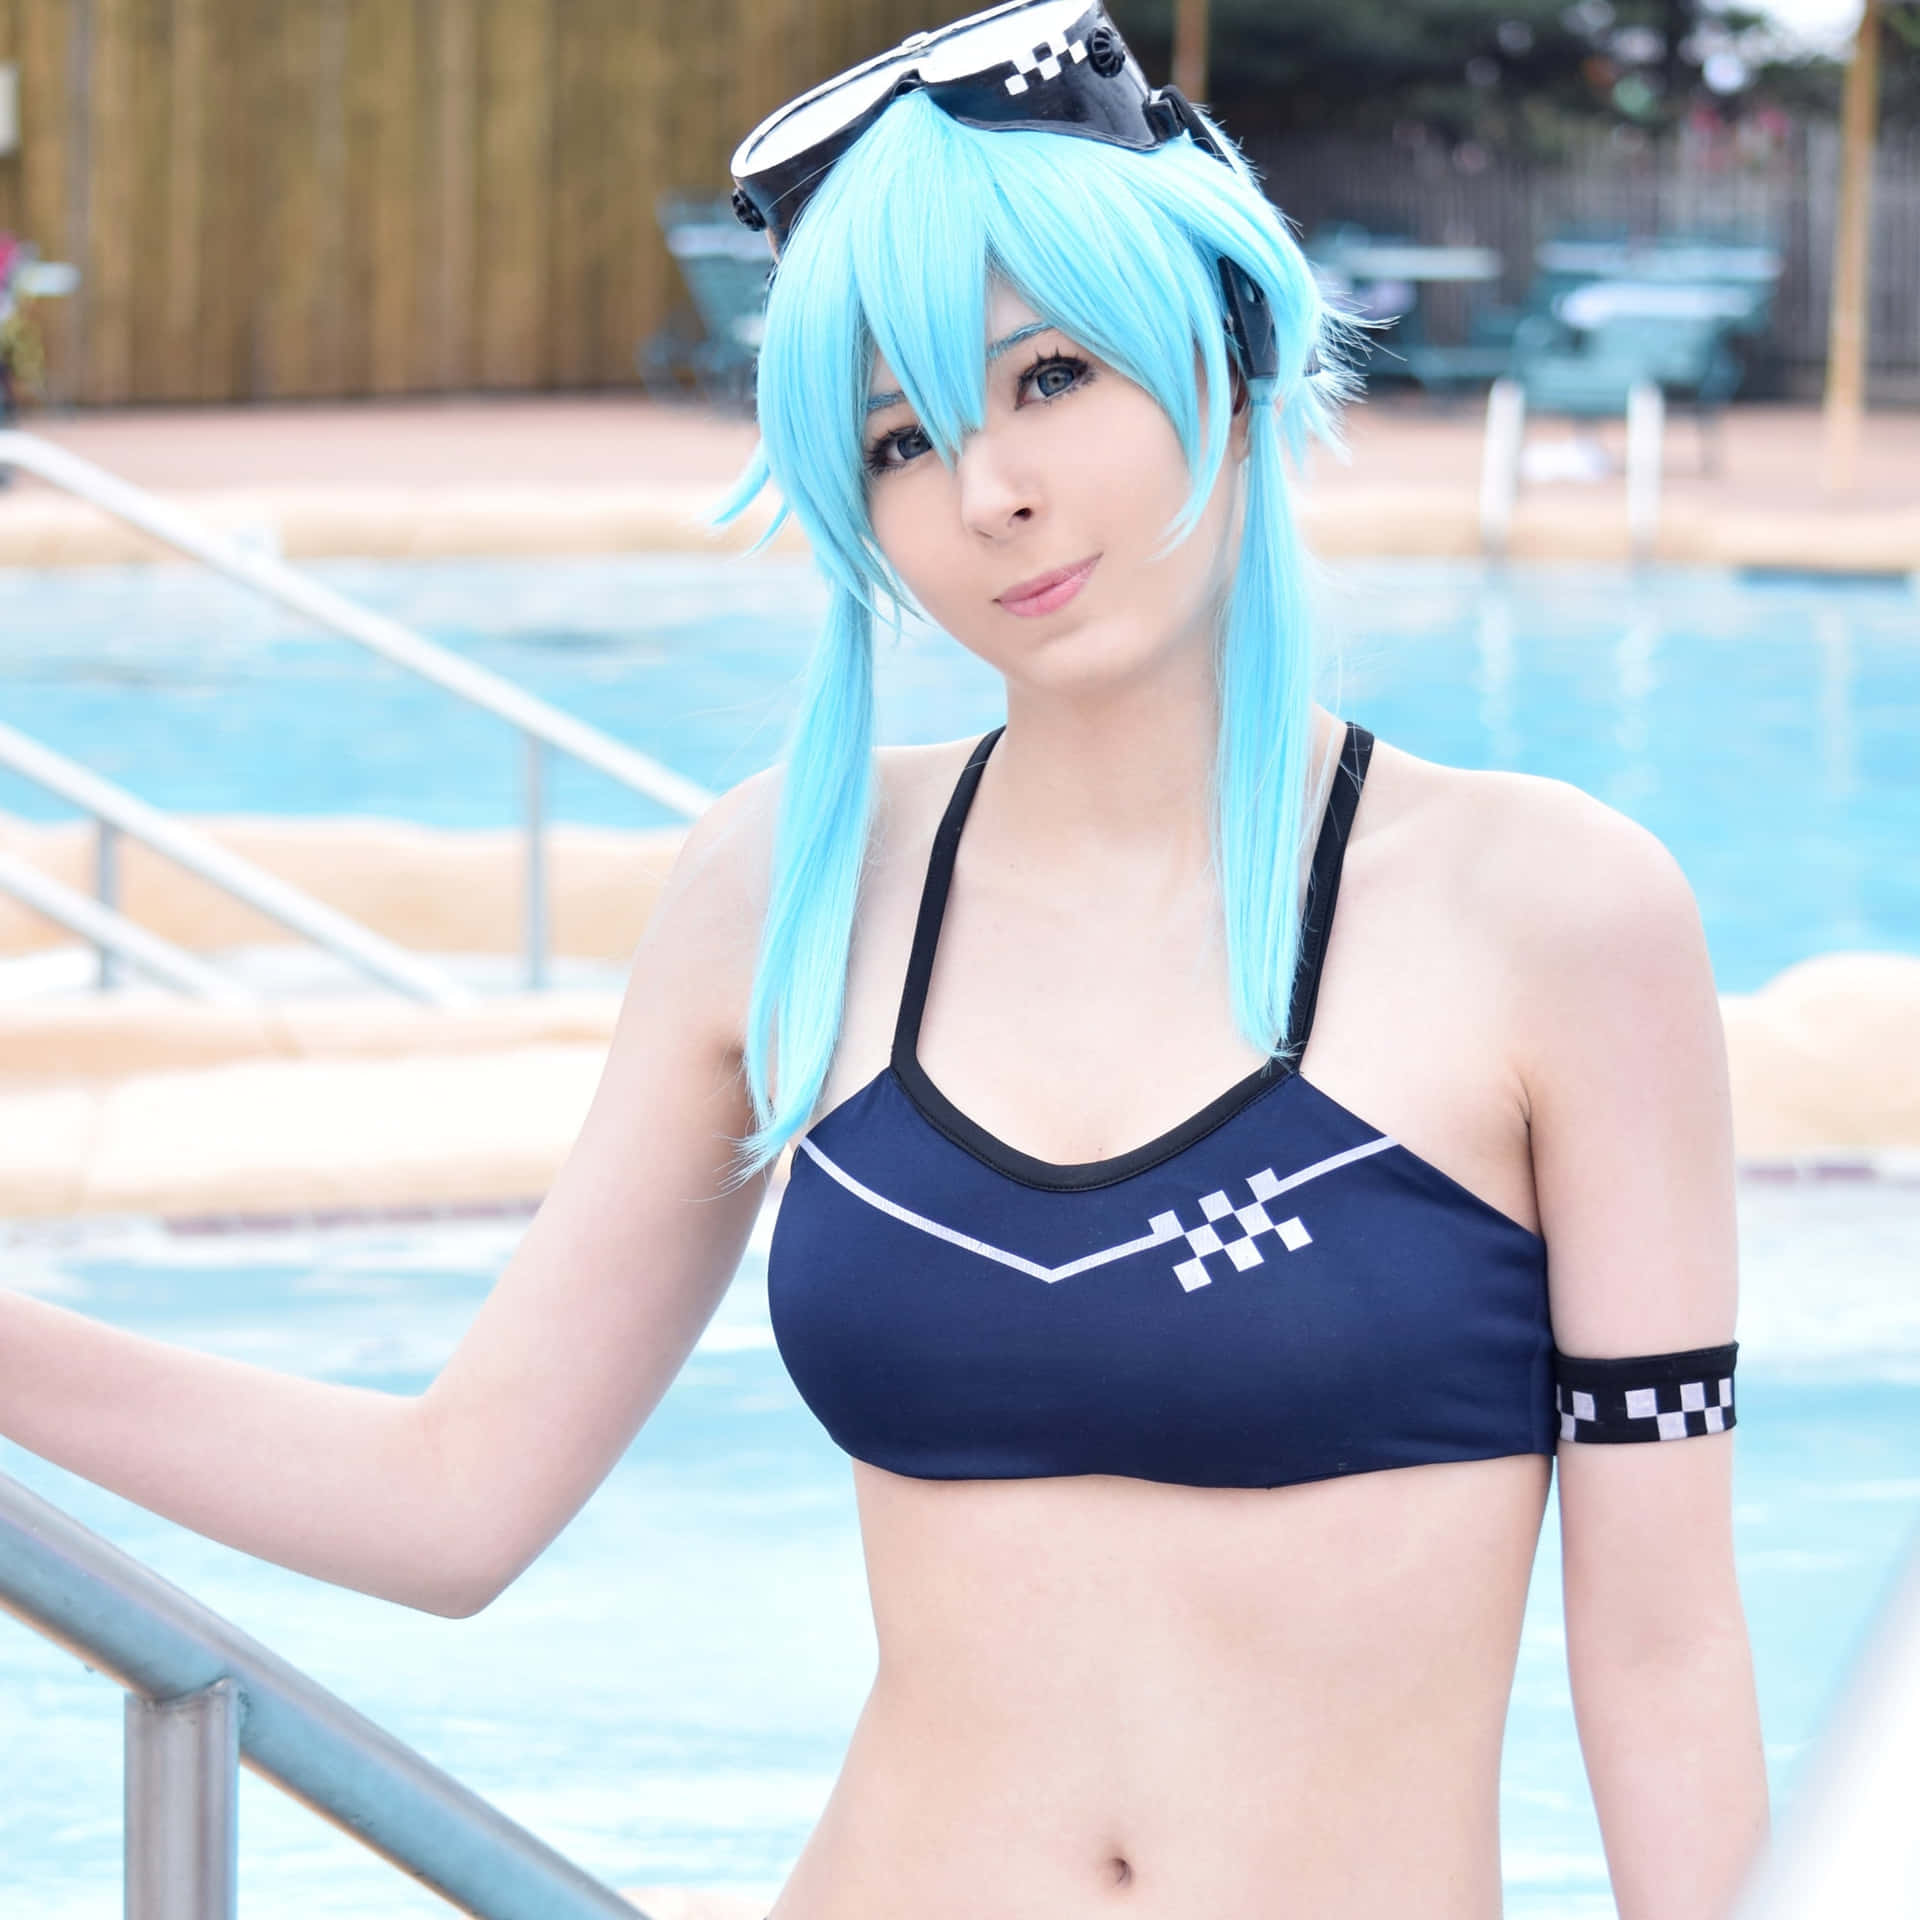 Sword Art Online Characters Brought to Life through Cosplay Wallpaper